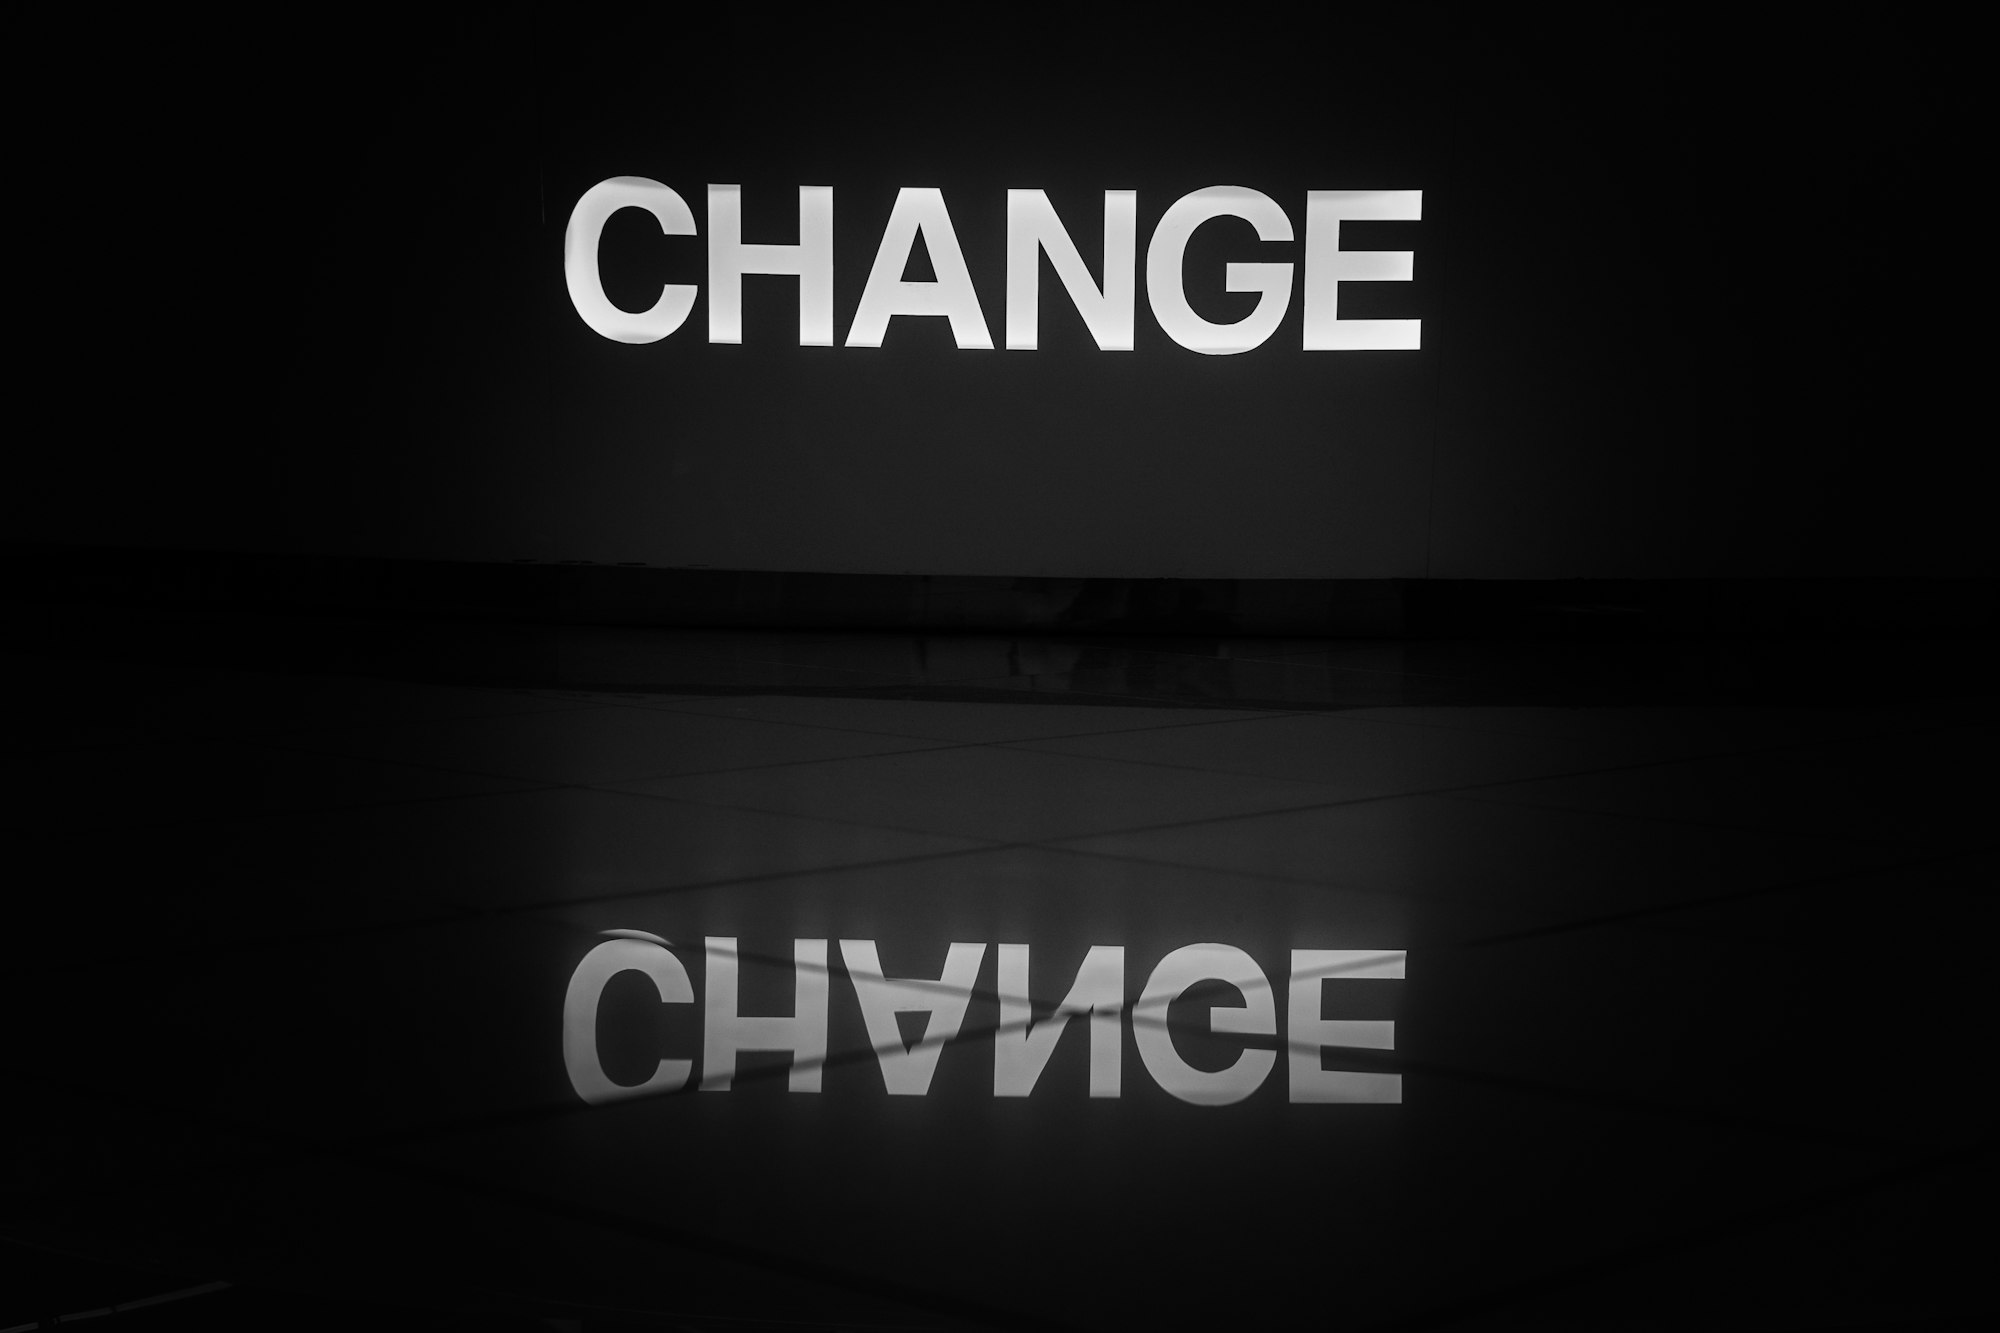 The word change illuminated in white and reflected on a tiled floor.